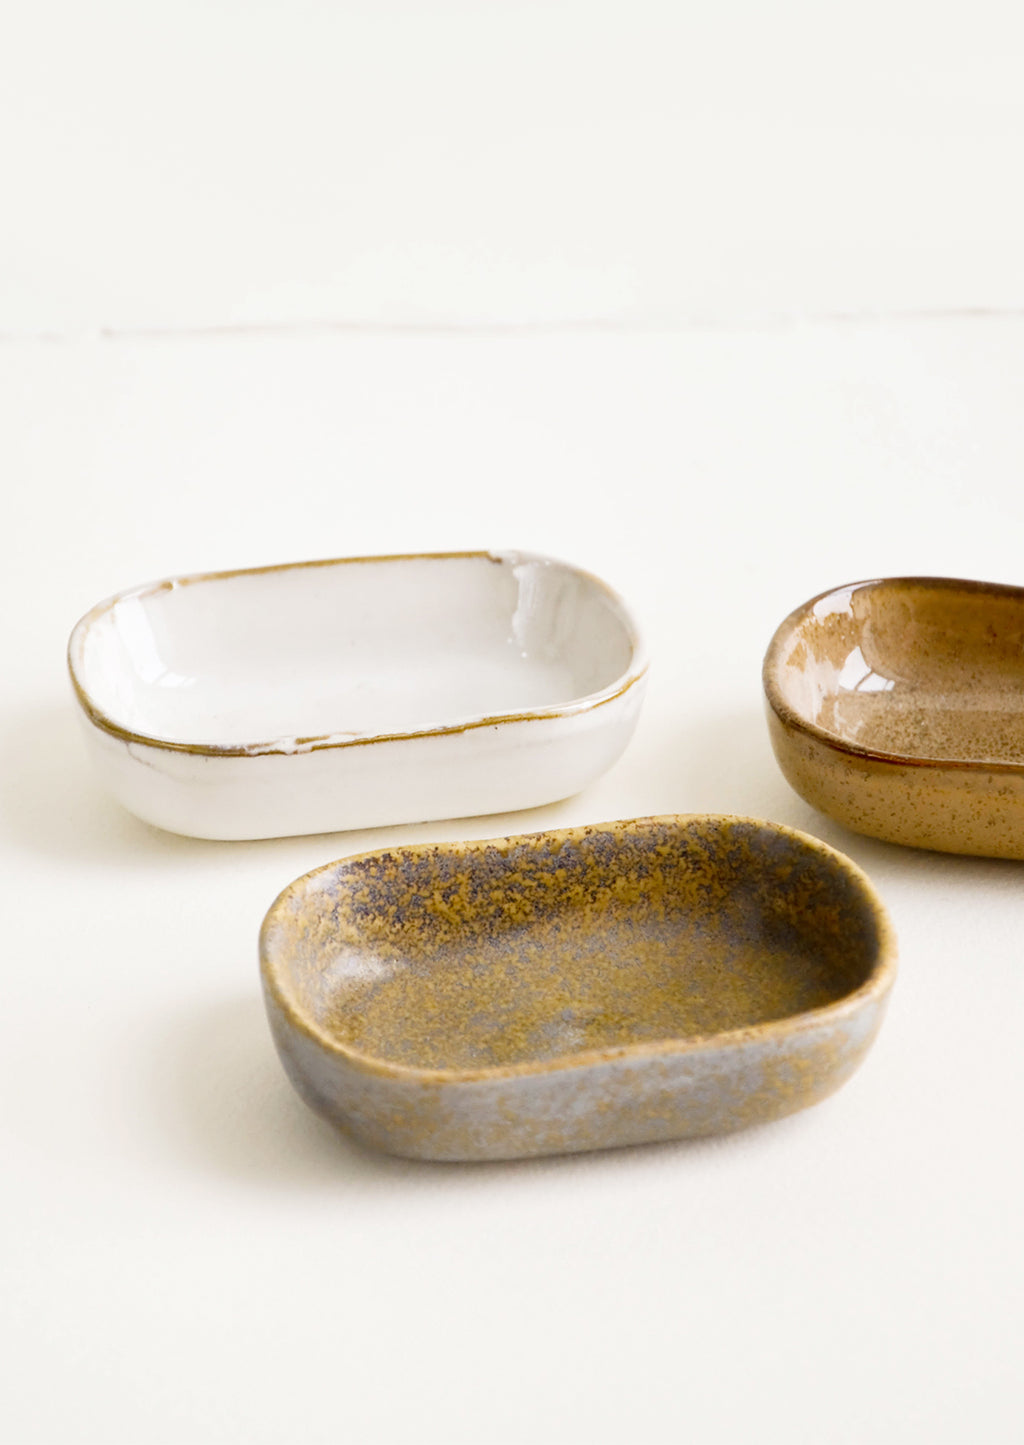 2: Trio of glossy ceramic Sauce Dishes in Earth Tones.